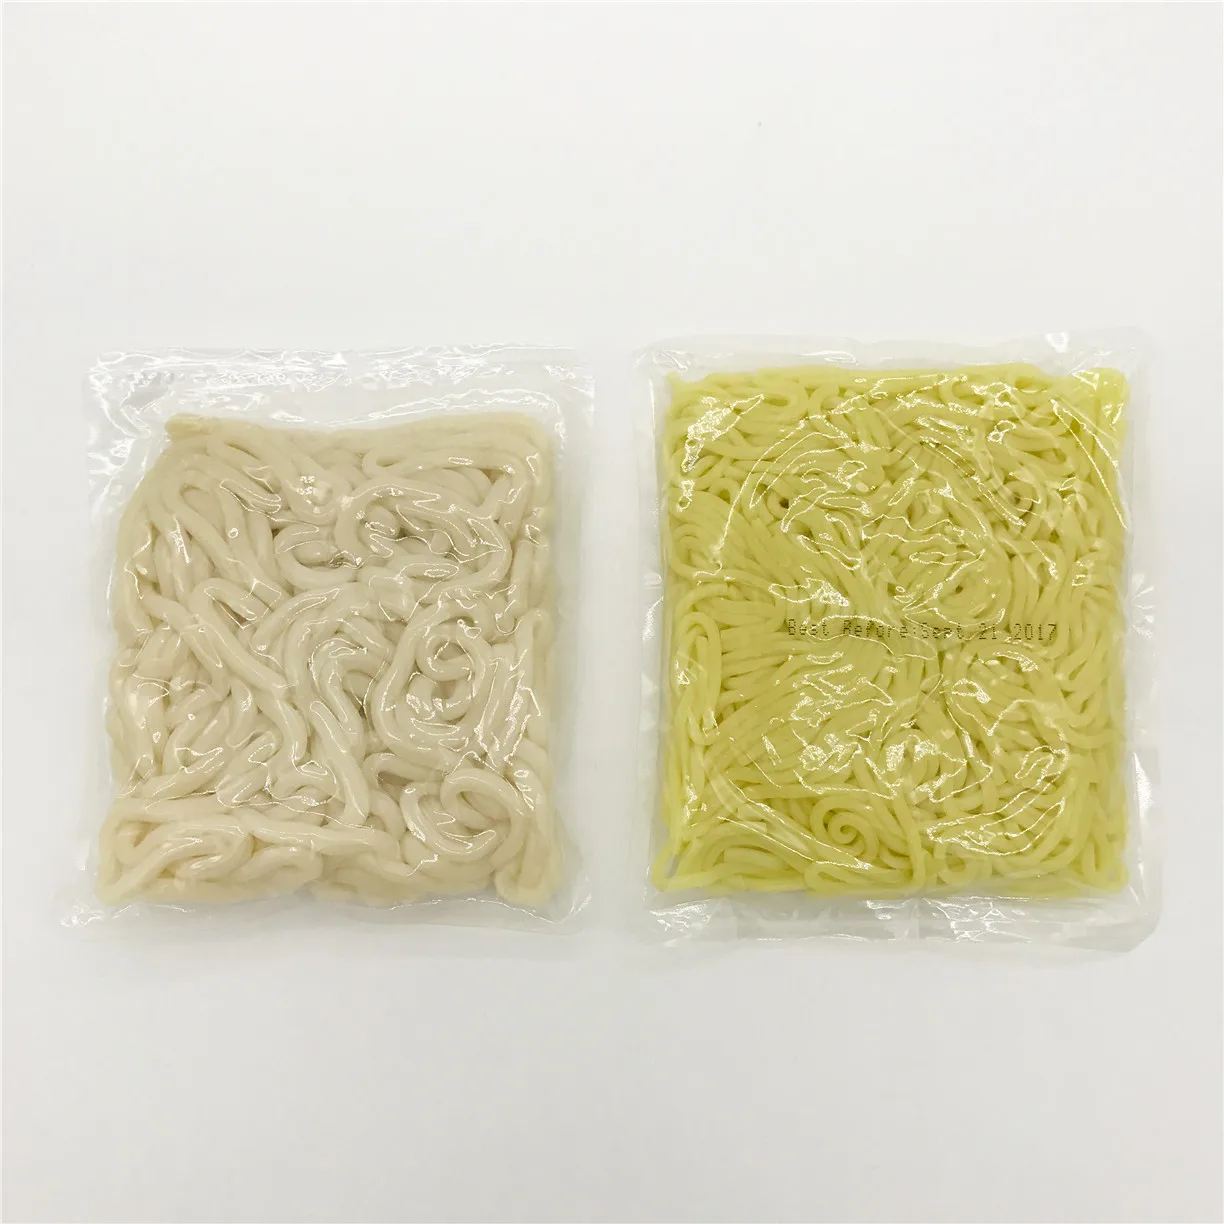 
Konjac White & Green Shirataki 2000g Low Carb Keto Friendly Weight Loss OEM Business Pack Restaurant Hotel Noodles 